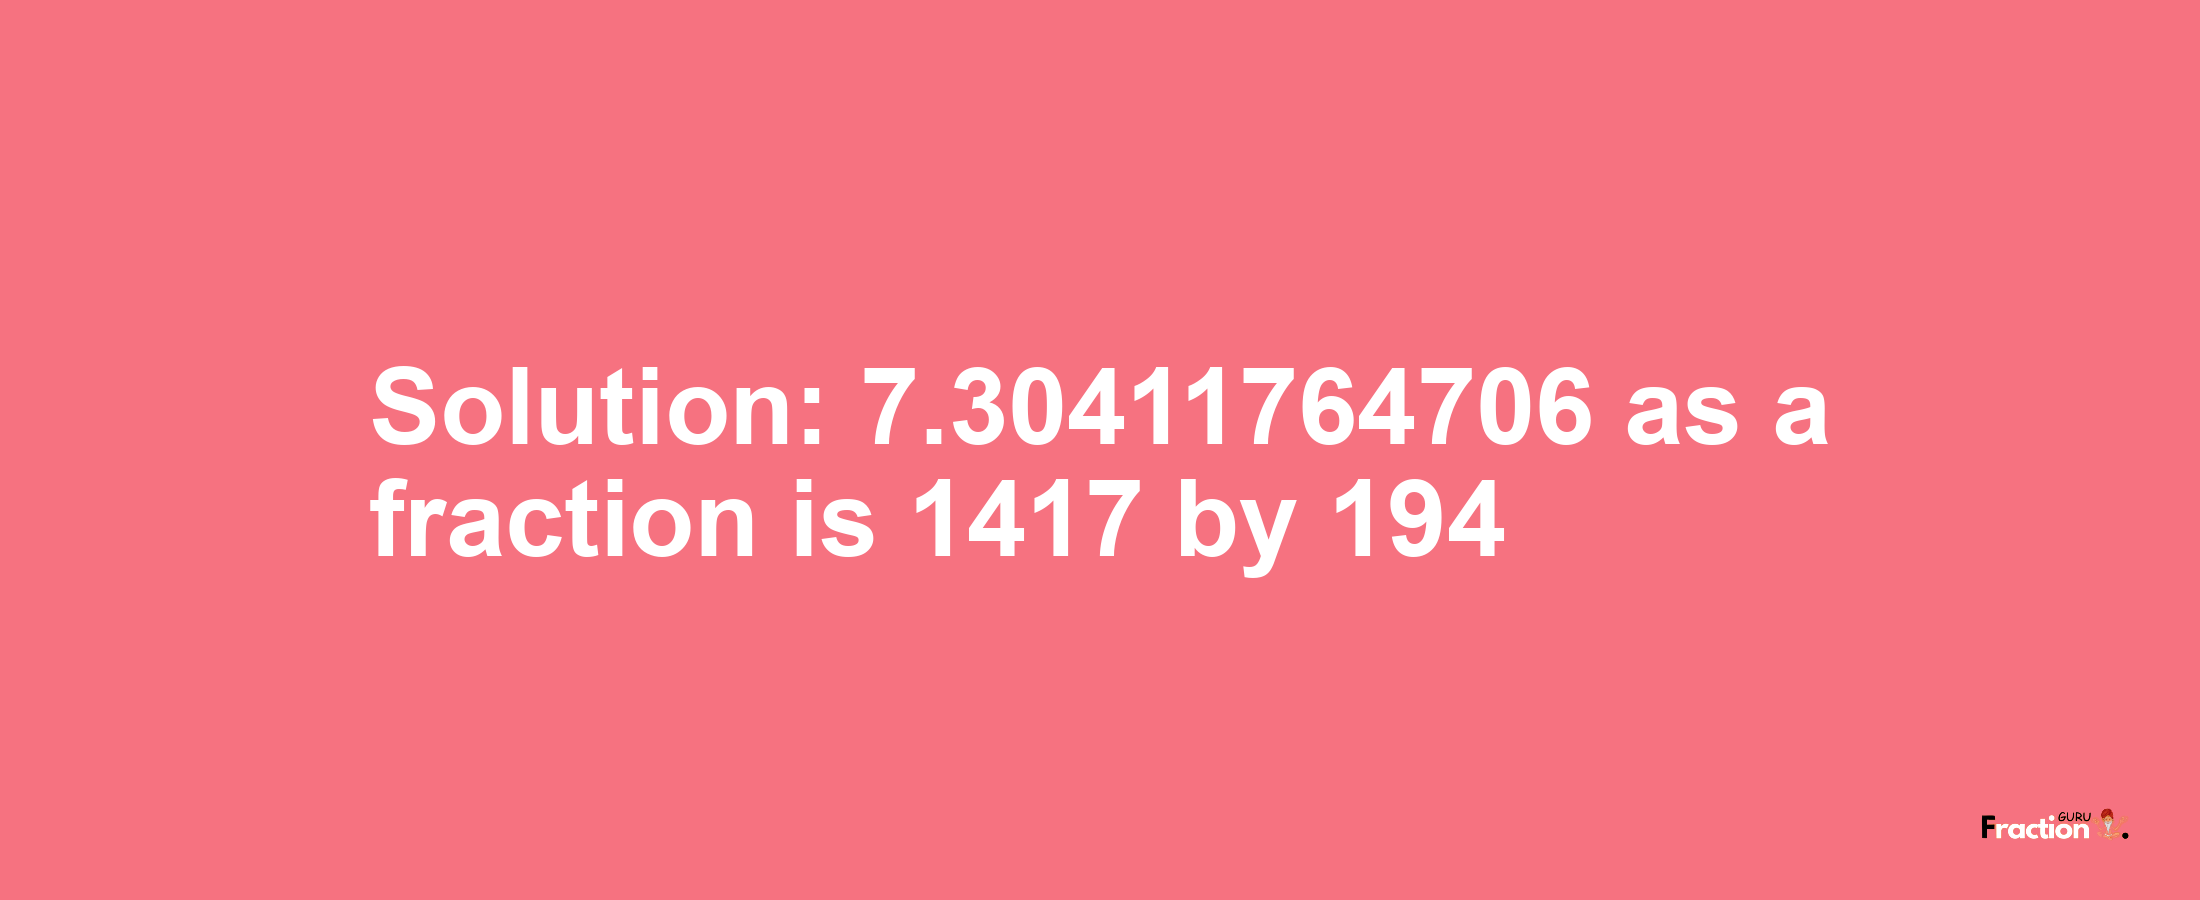 Solution:7.30411764706 as a fraction is 1417/194